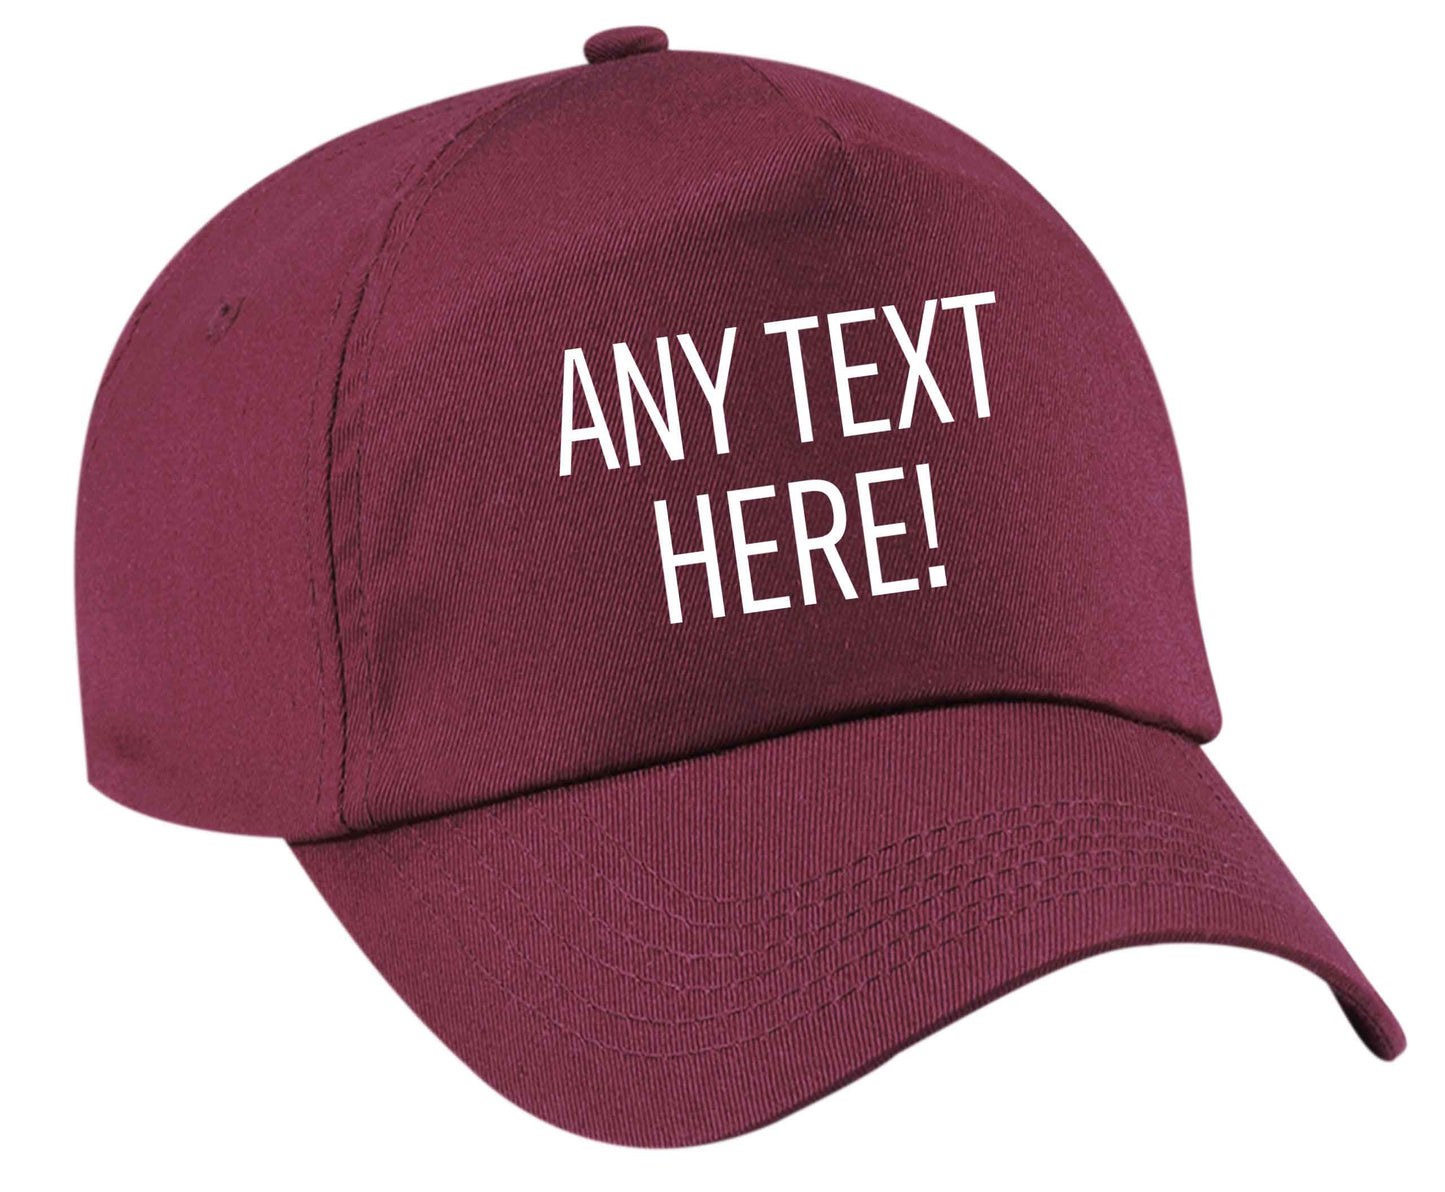 Any text here | Baseball Cap | Custom order any text colour and font